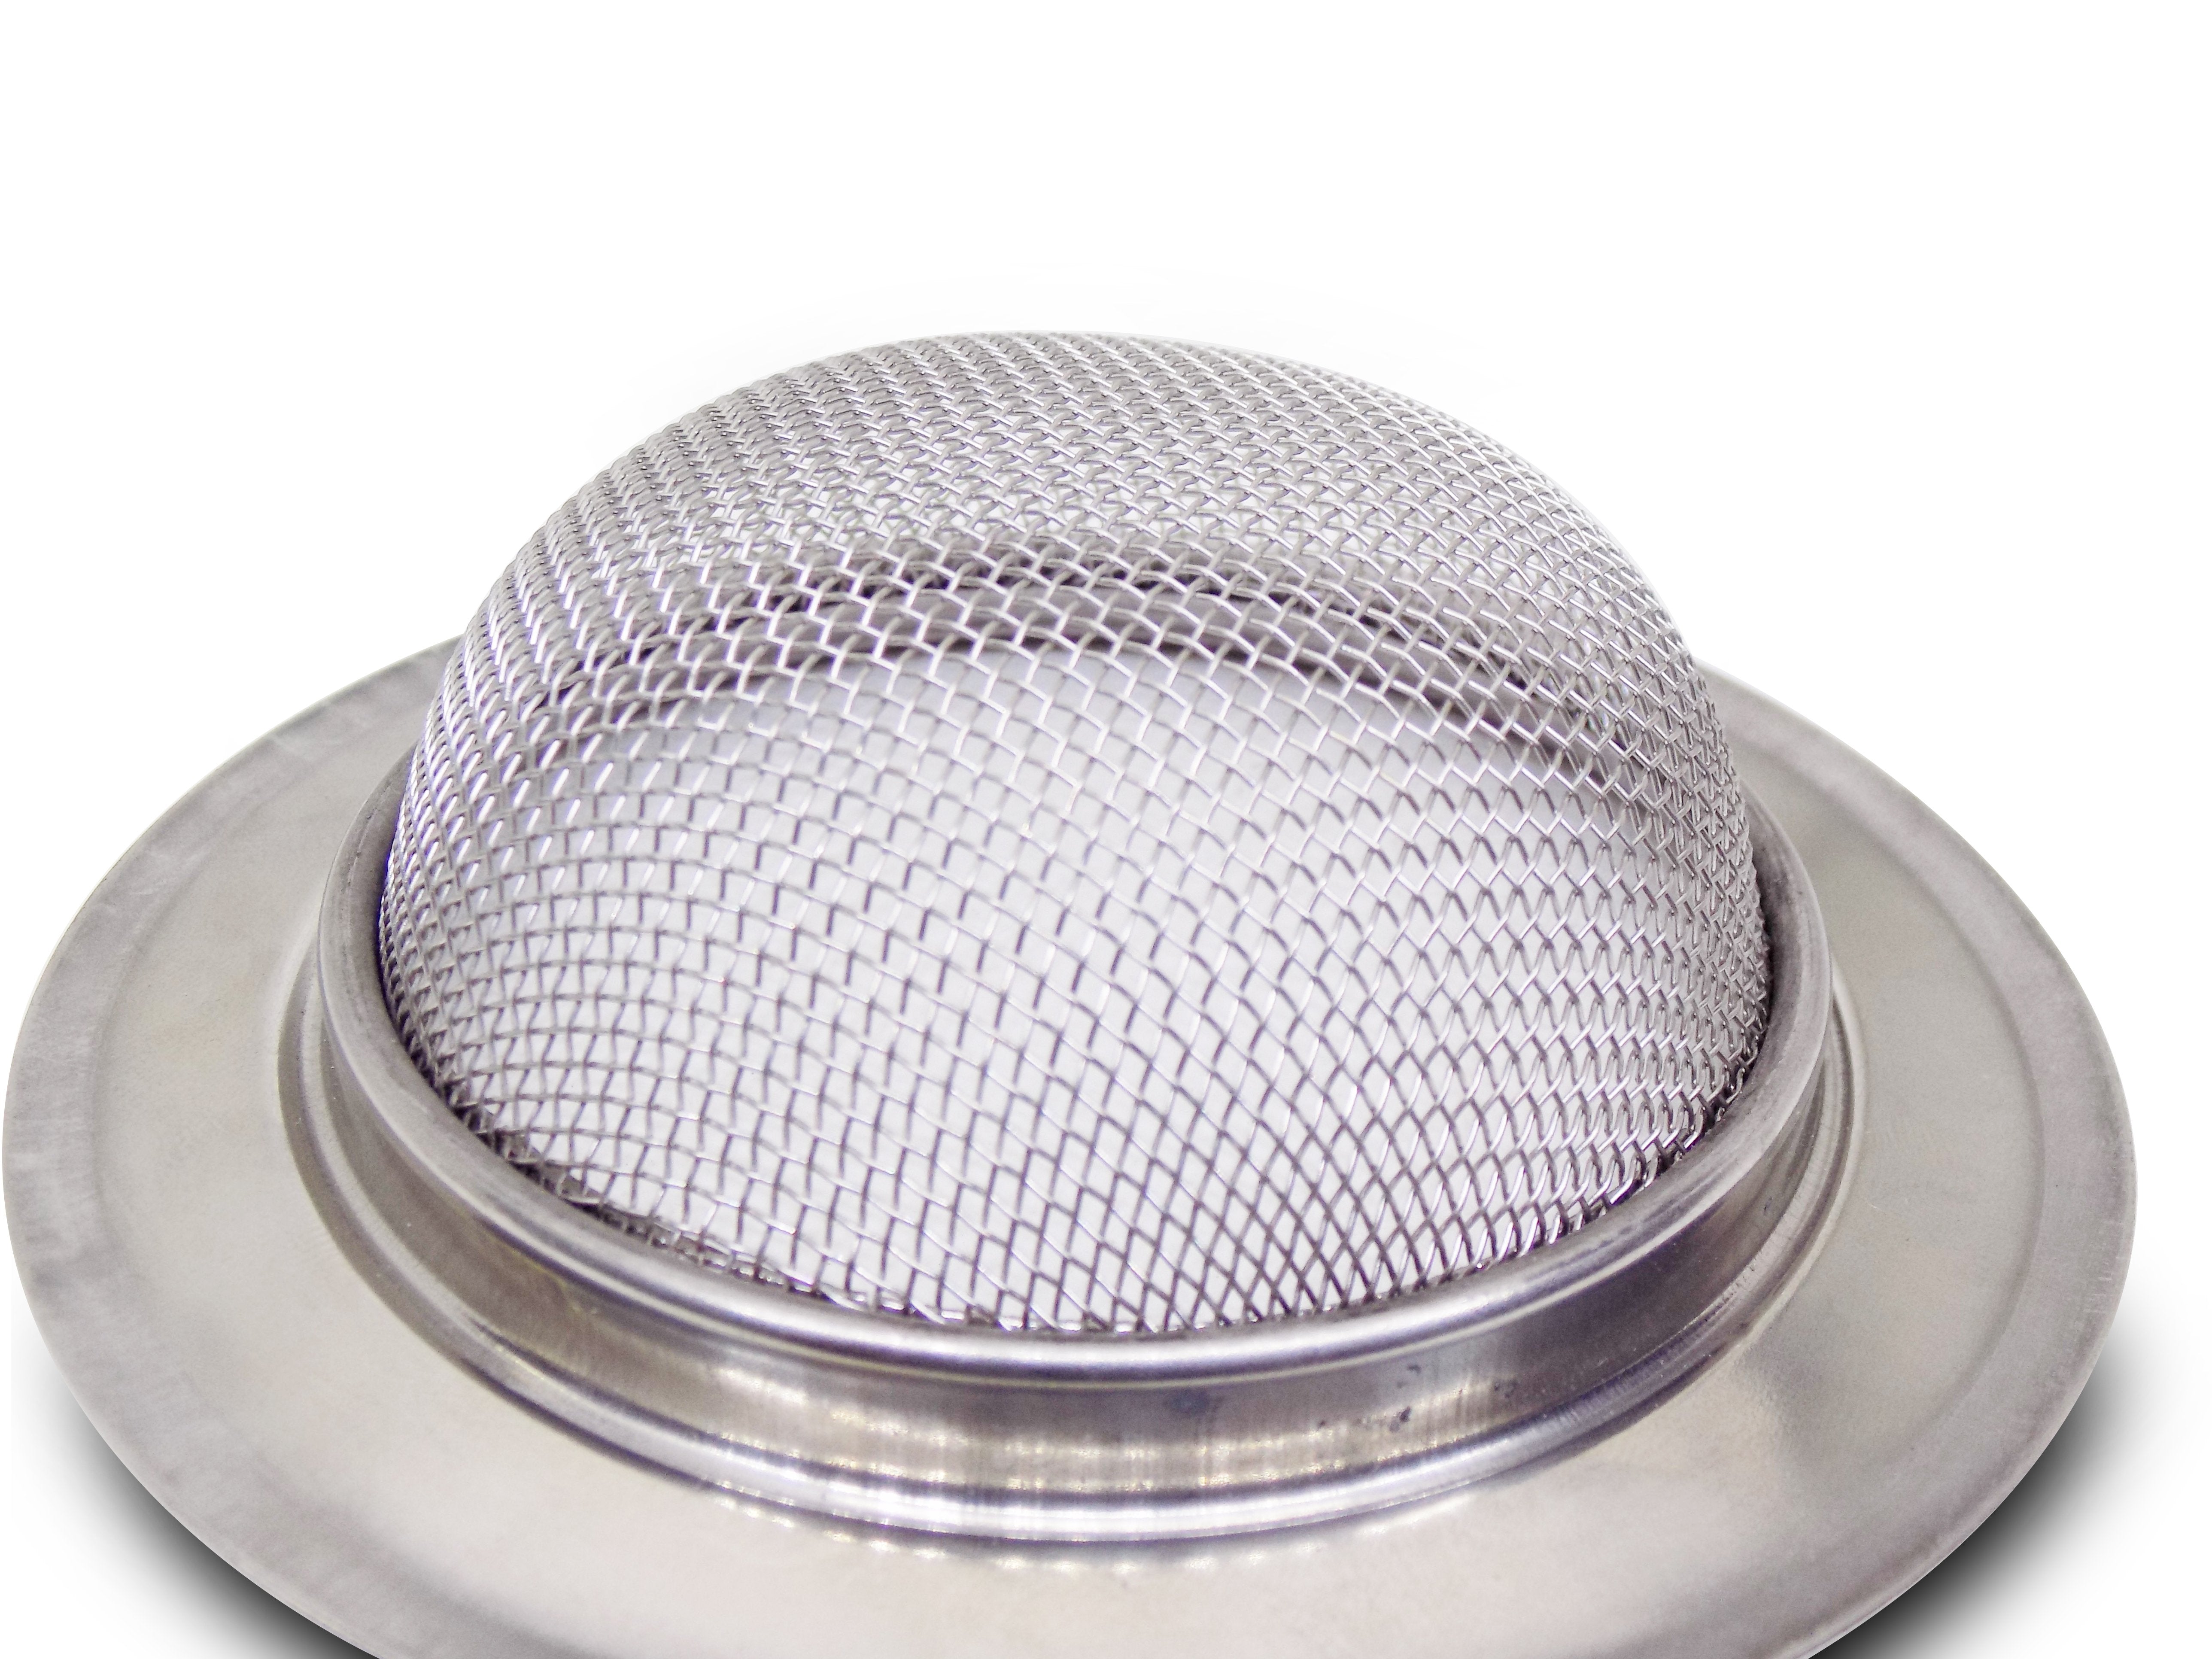 0792 Small Stainless Steel Sink/Wash Basin Drain Strainer - SkyShopy